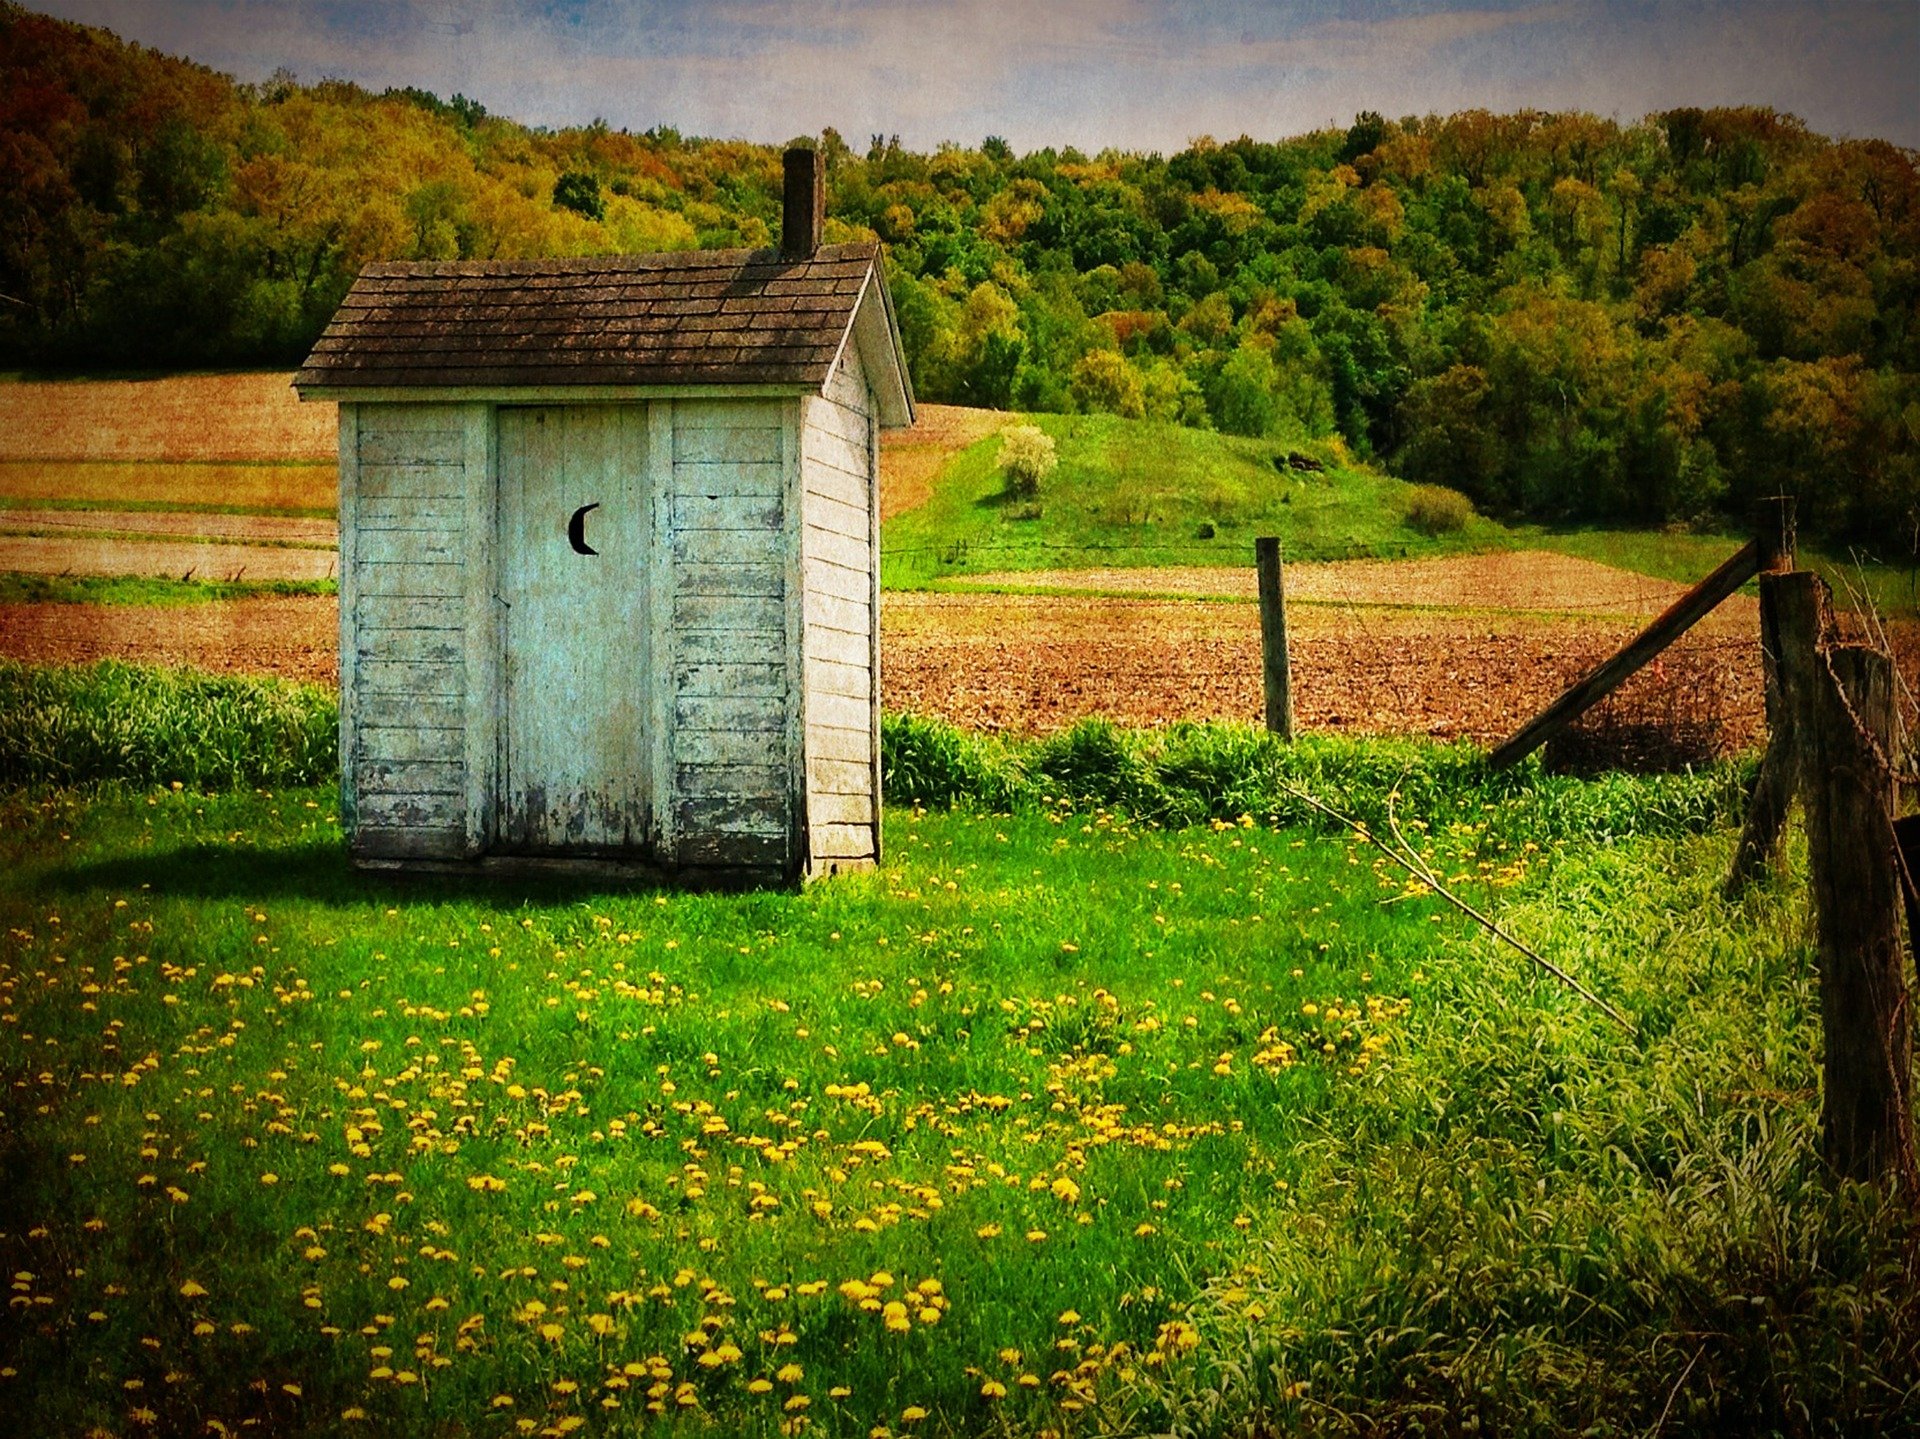 An outhouse in a field. | Photo: Pixabay/Lisa Baird 